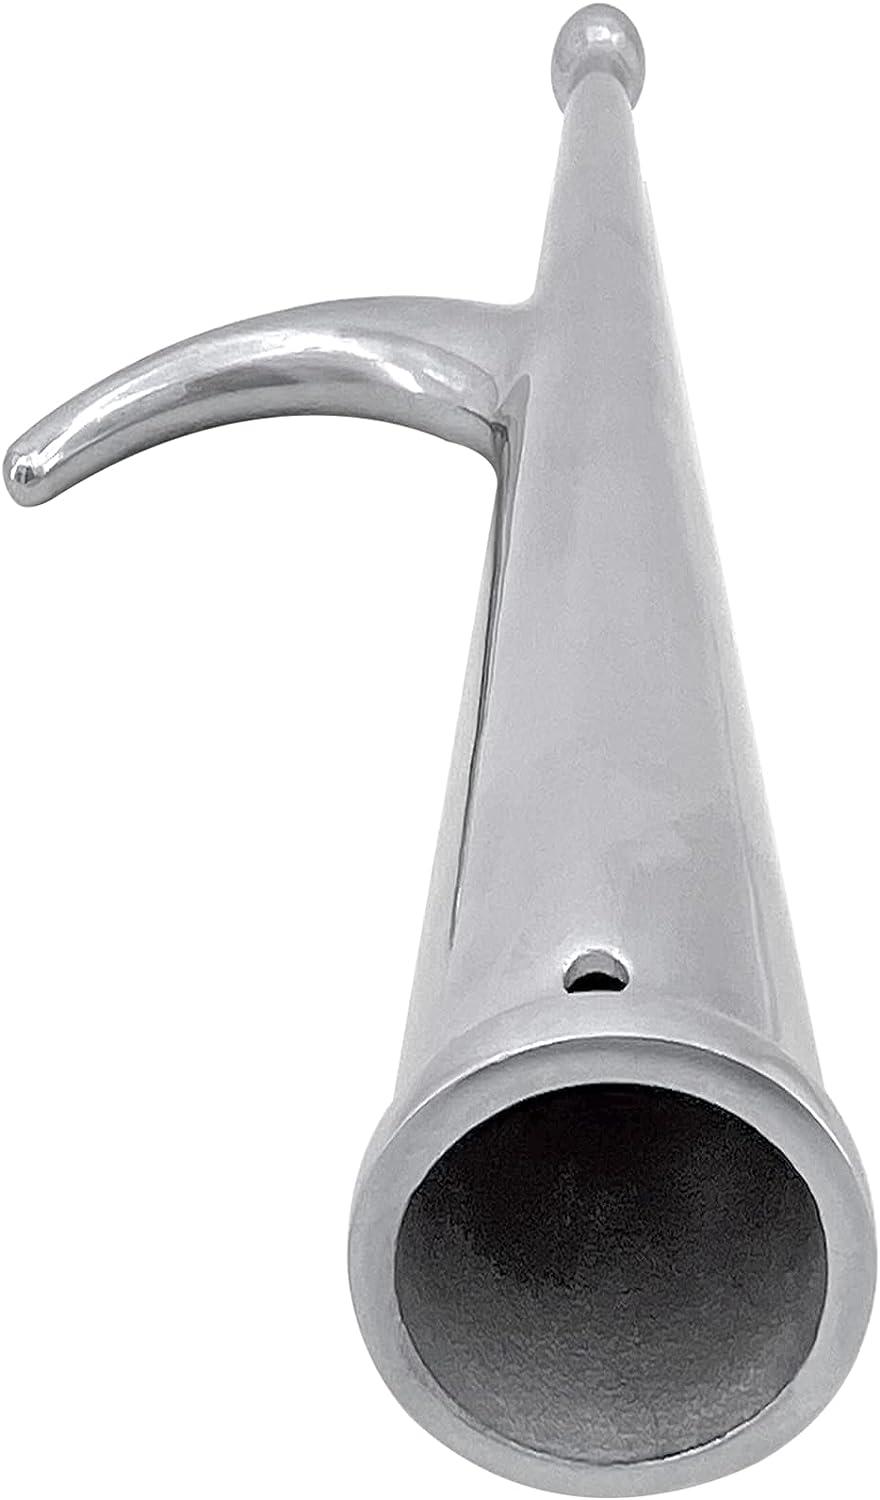 ISURE MARINE Stainless Steel Boat Hook Floating Hook for Extension Pole,Unbreakable,Durable,Rust-Resistant  Boat Hook Replacement Attachment Replacement Boat Hook End for Mooring  Yacht Boat Kayak